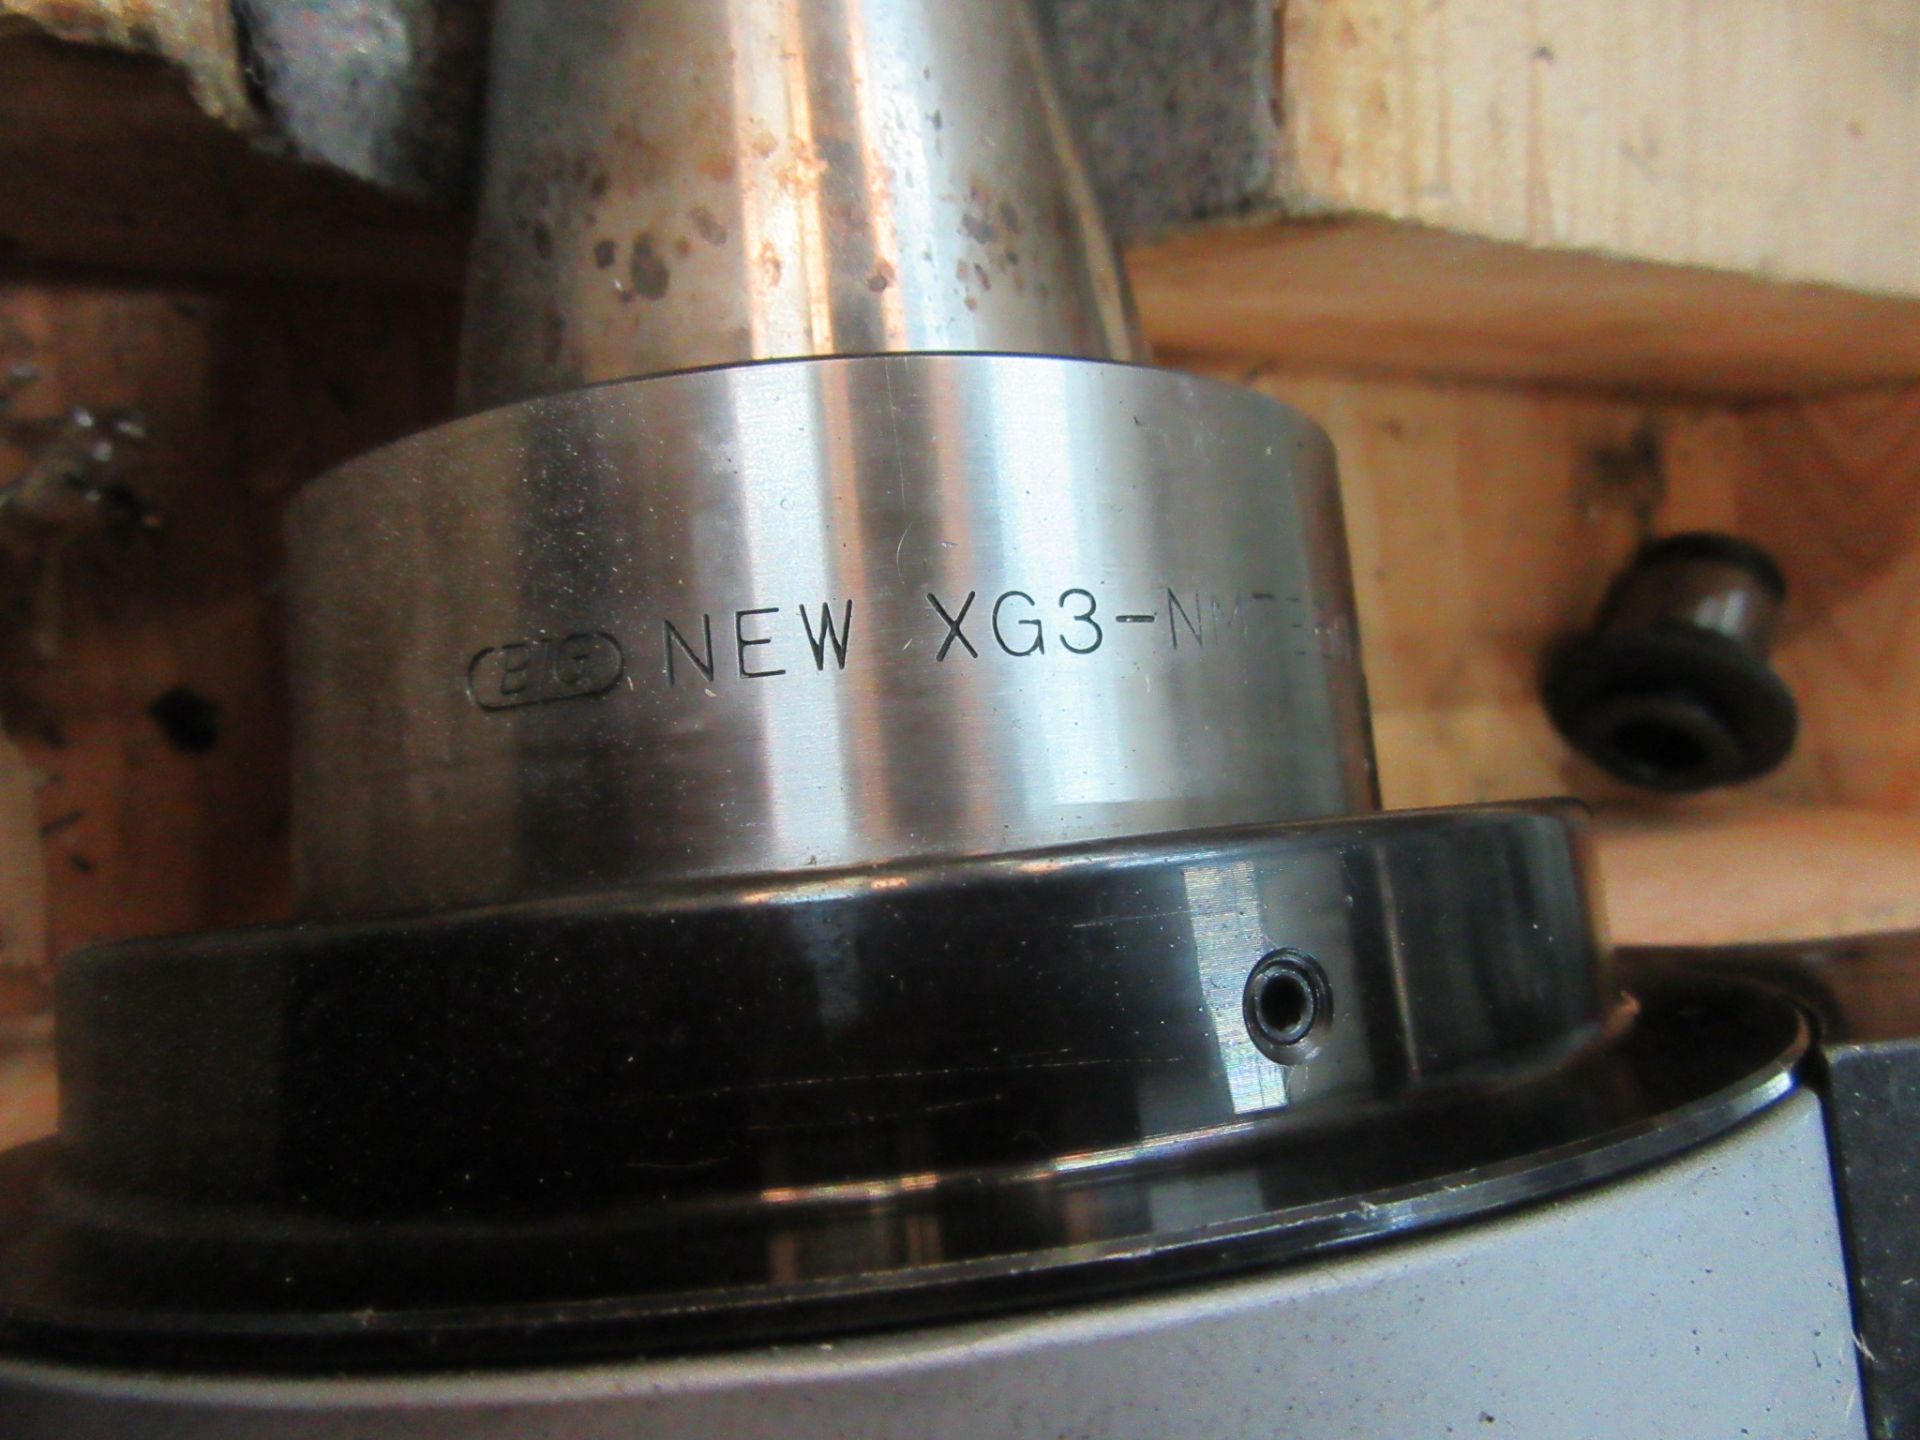 BIG NEW XG3-NMTB50 SPEED MULTIPLIER 50 TAPER WITH BIG NEW HI-POWER MILLING CHUCK HMV 1.250 - Image 2 of 3